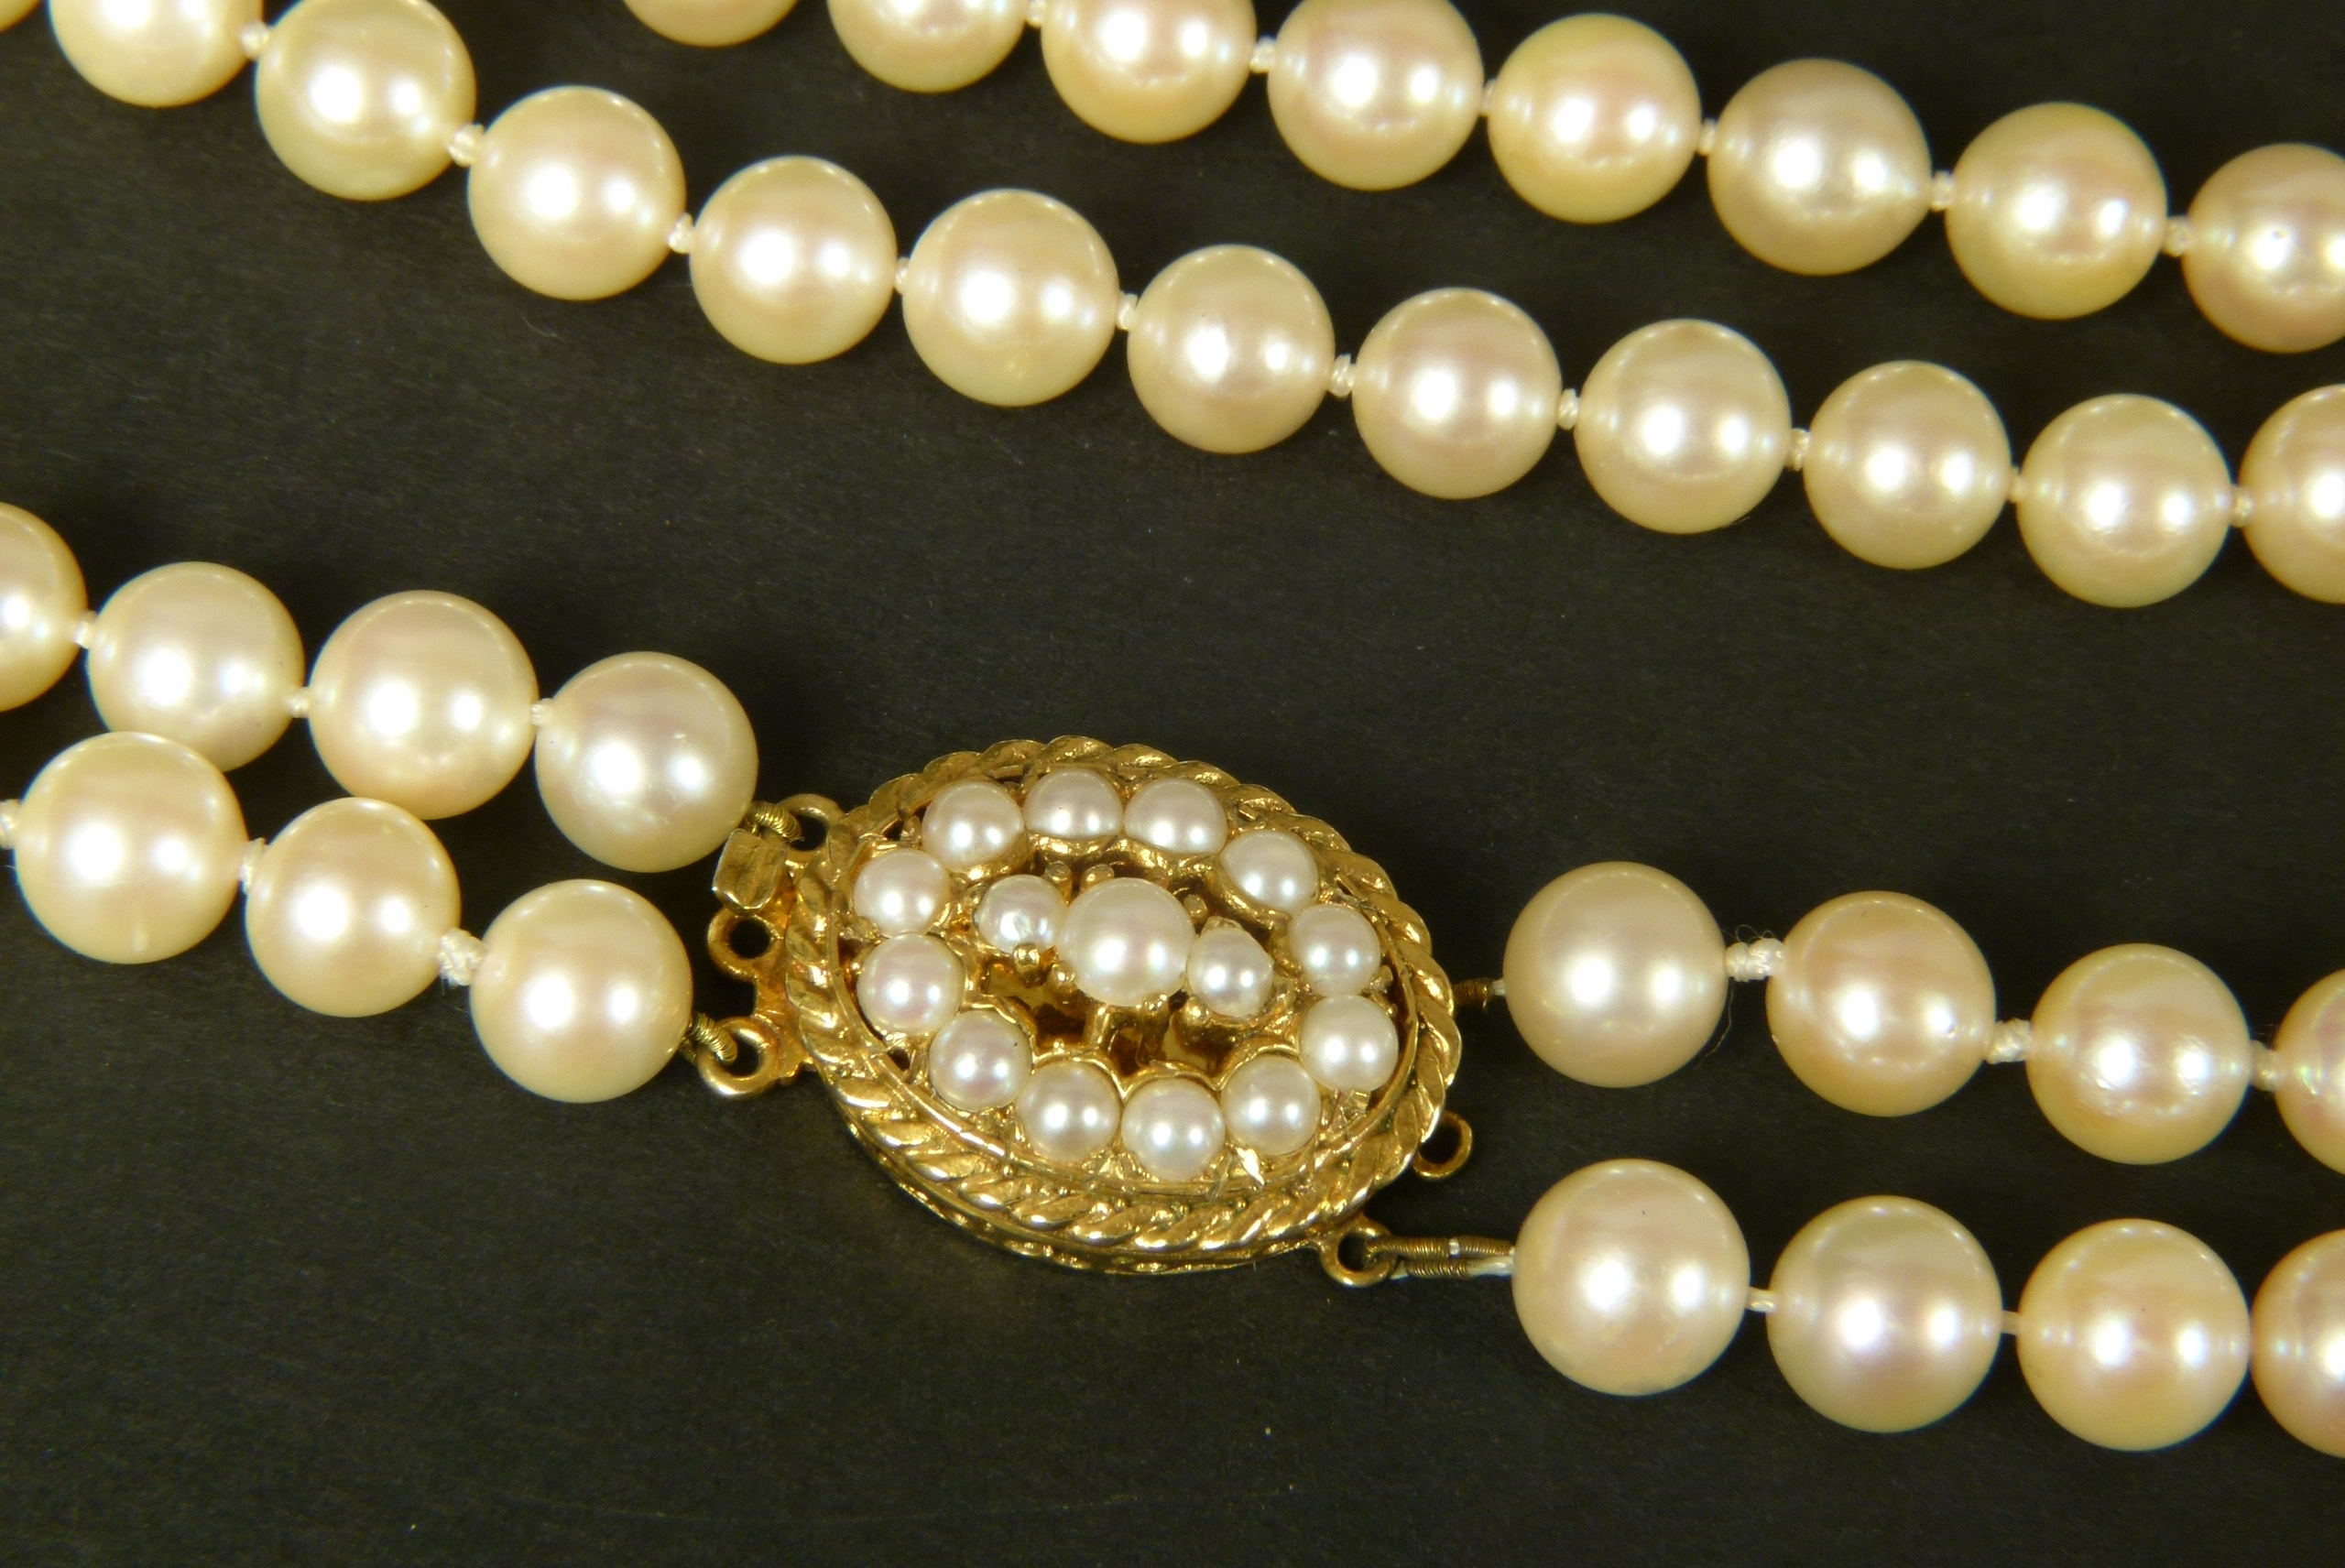 CULTURED PEARL CHOKER NECKLACE in two strands of approximately 7mm pearls fastened with a 9ct gold